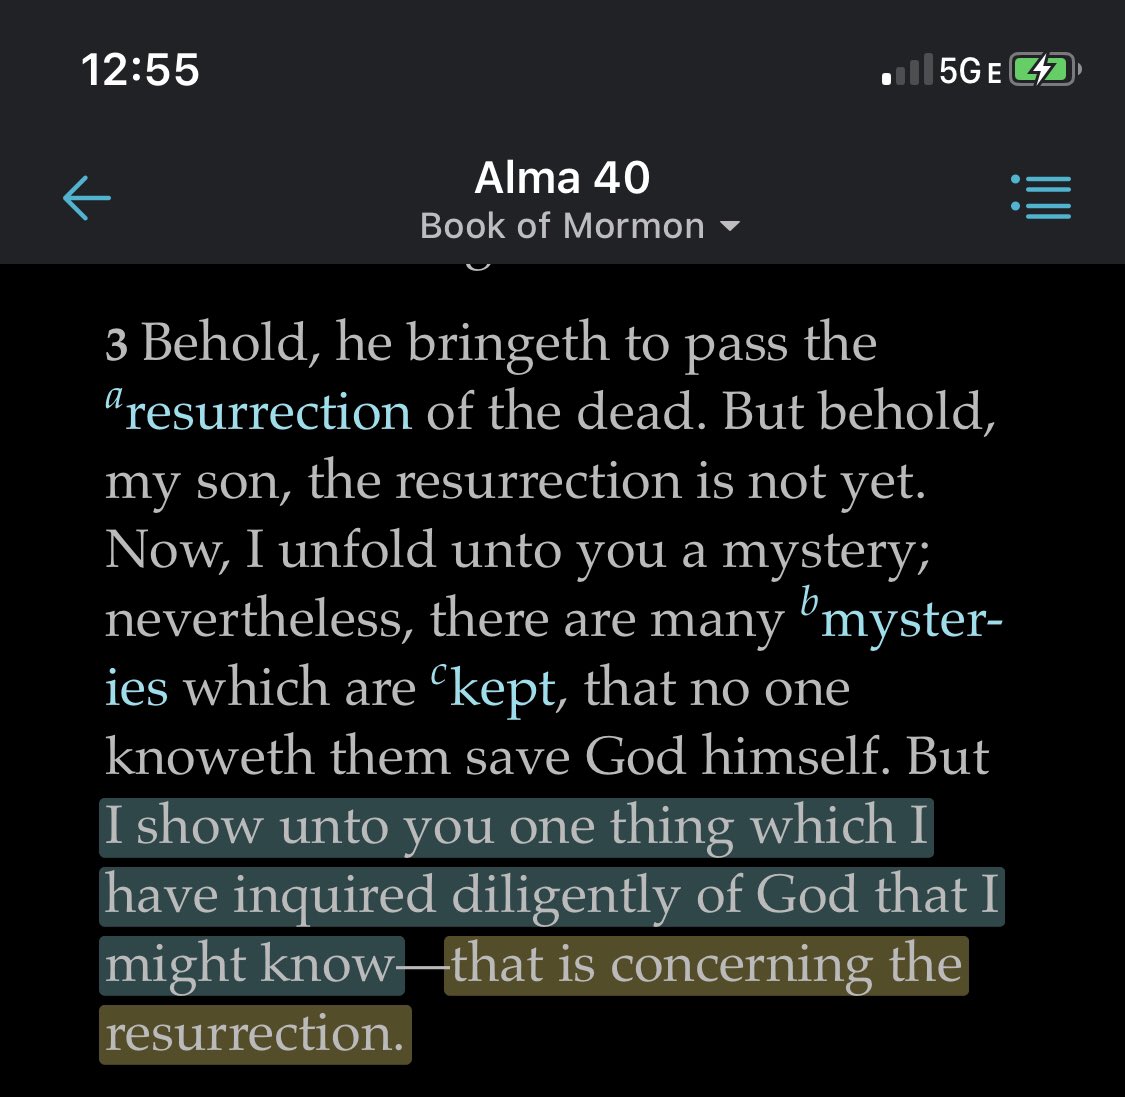 These experiences prompted both men to seek greater light and knowledge regarding the condition of those souls. Alma tells his of his diligent inquiry to further understand the mysteries of God regarding the resurrection of the dead.  #DezNat